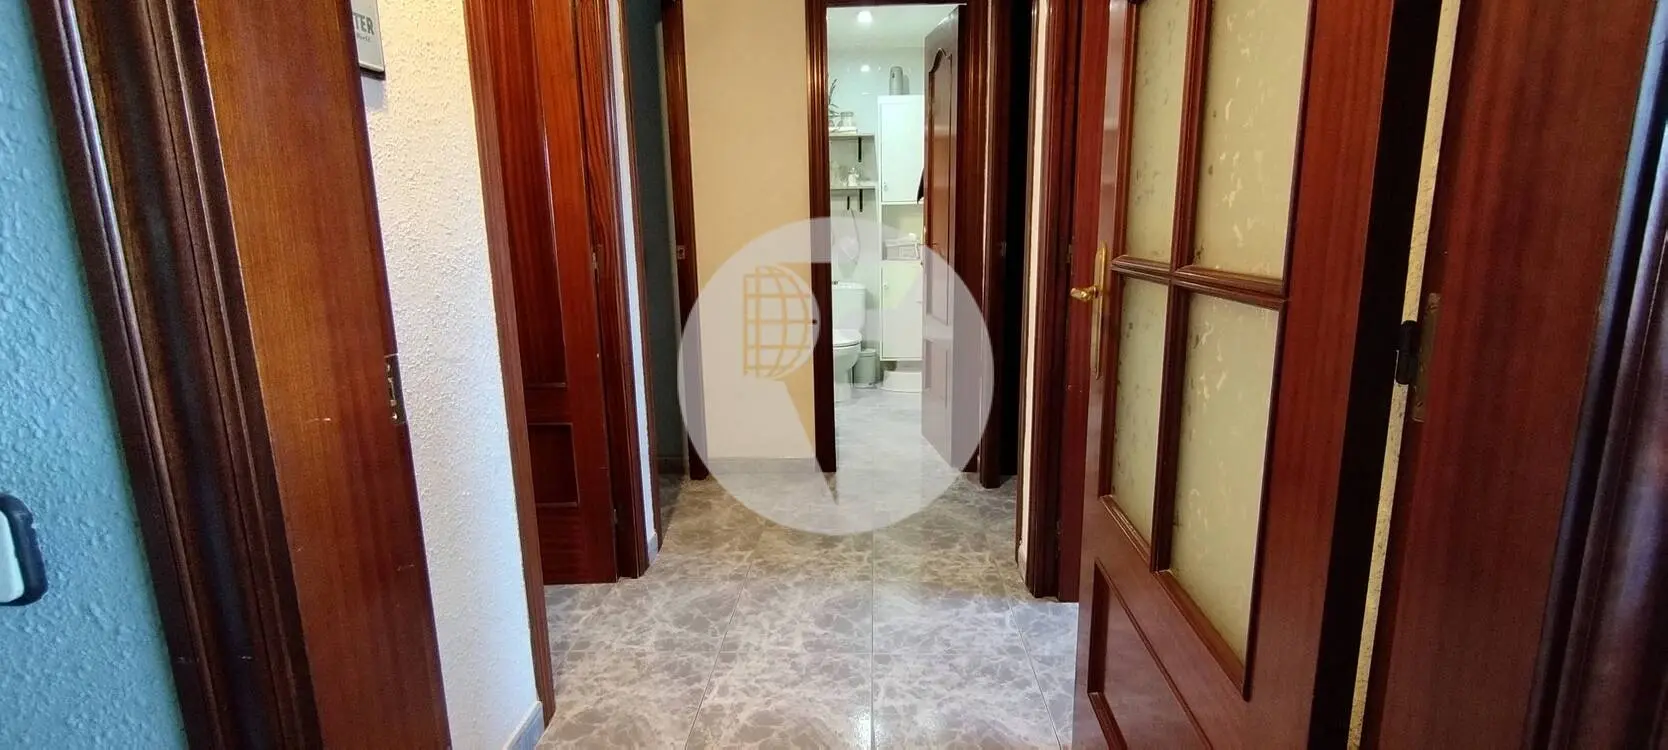 Charming 107m² flat with views and parking in Santa Eulalia de Ronçana 19